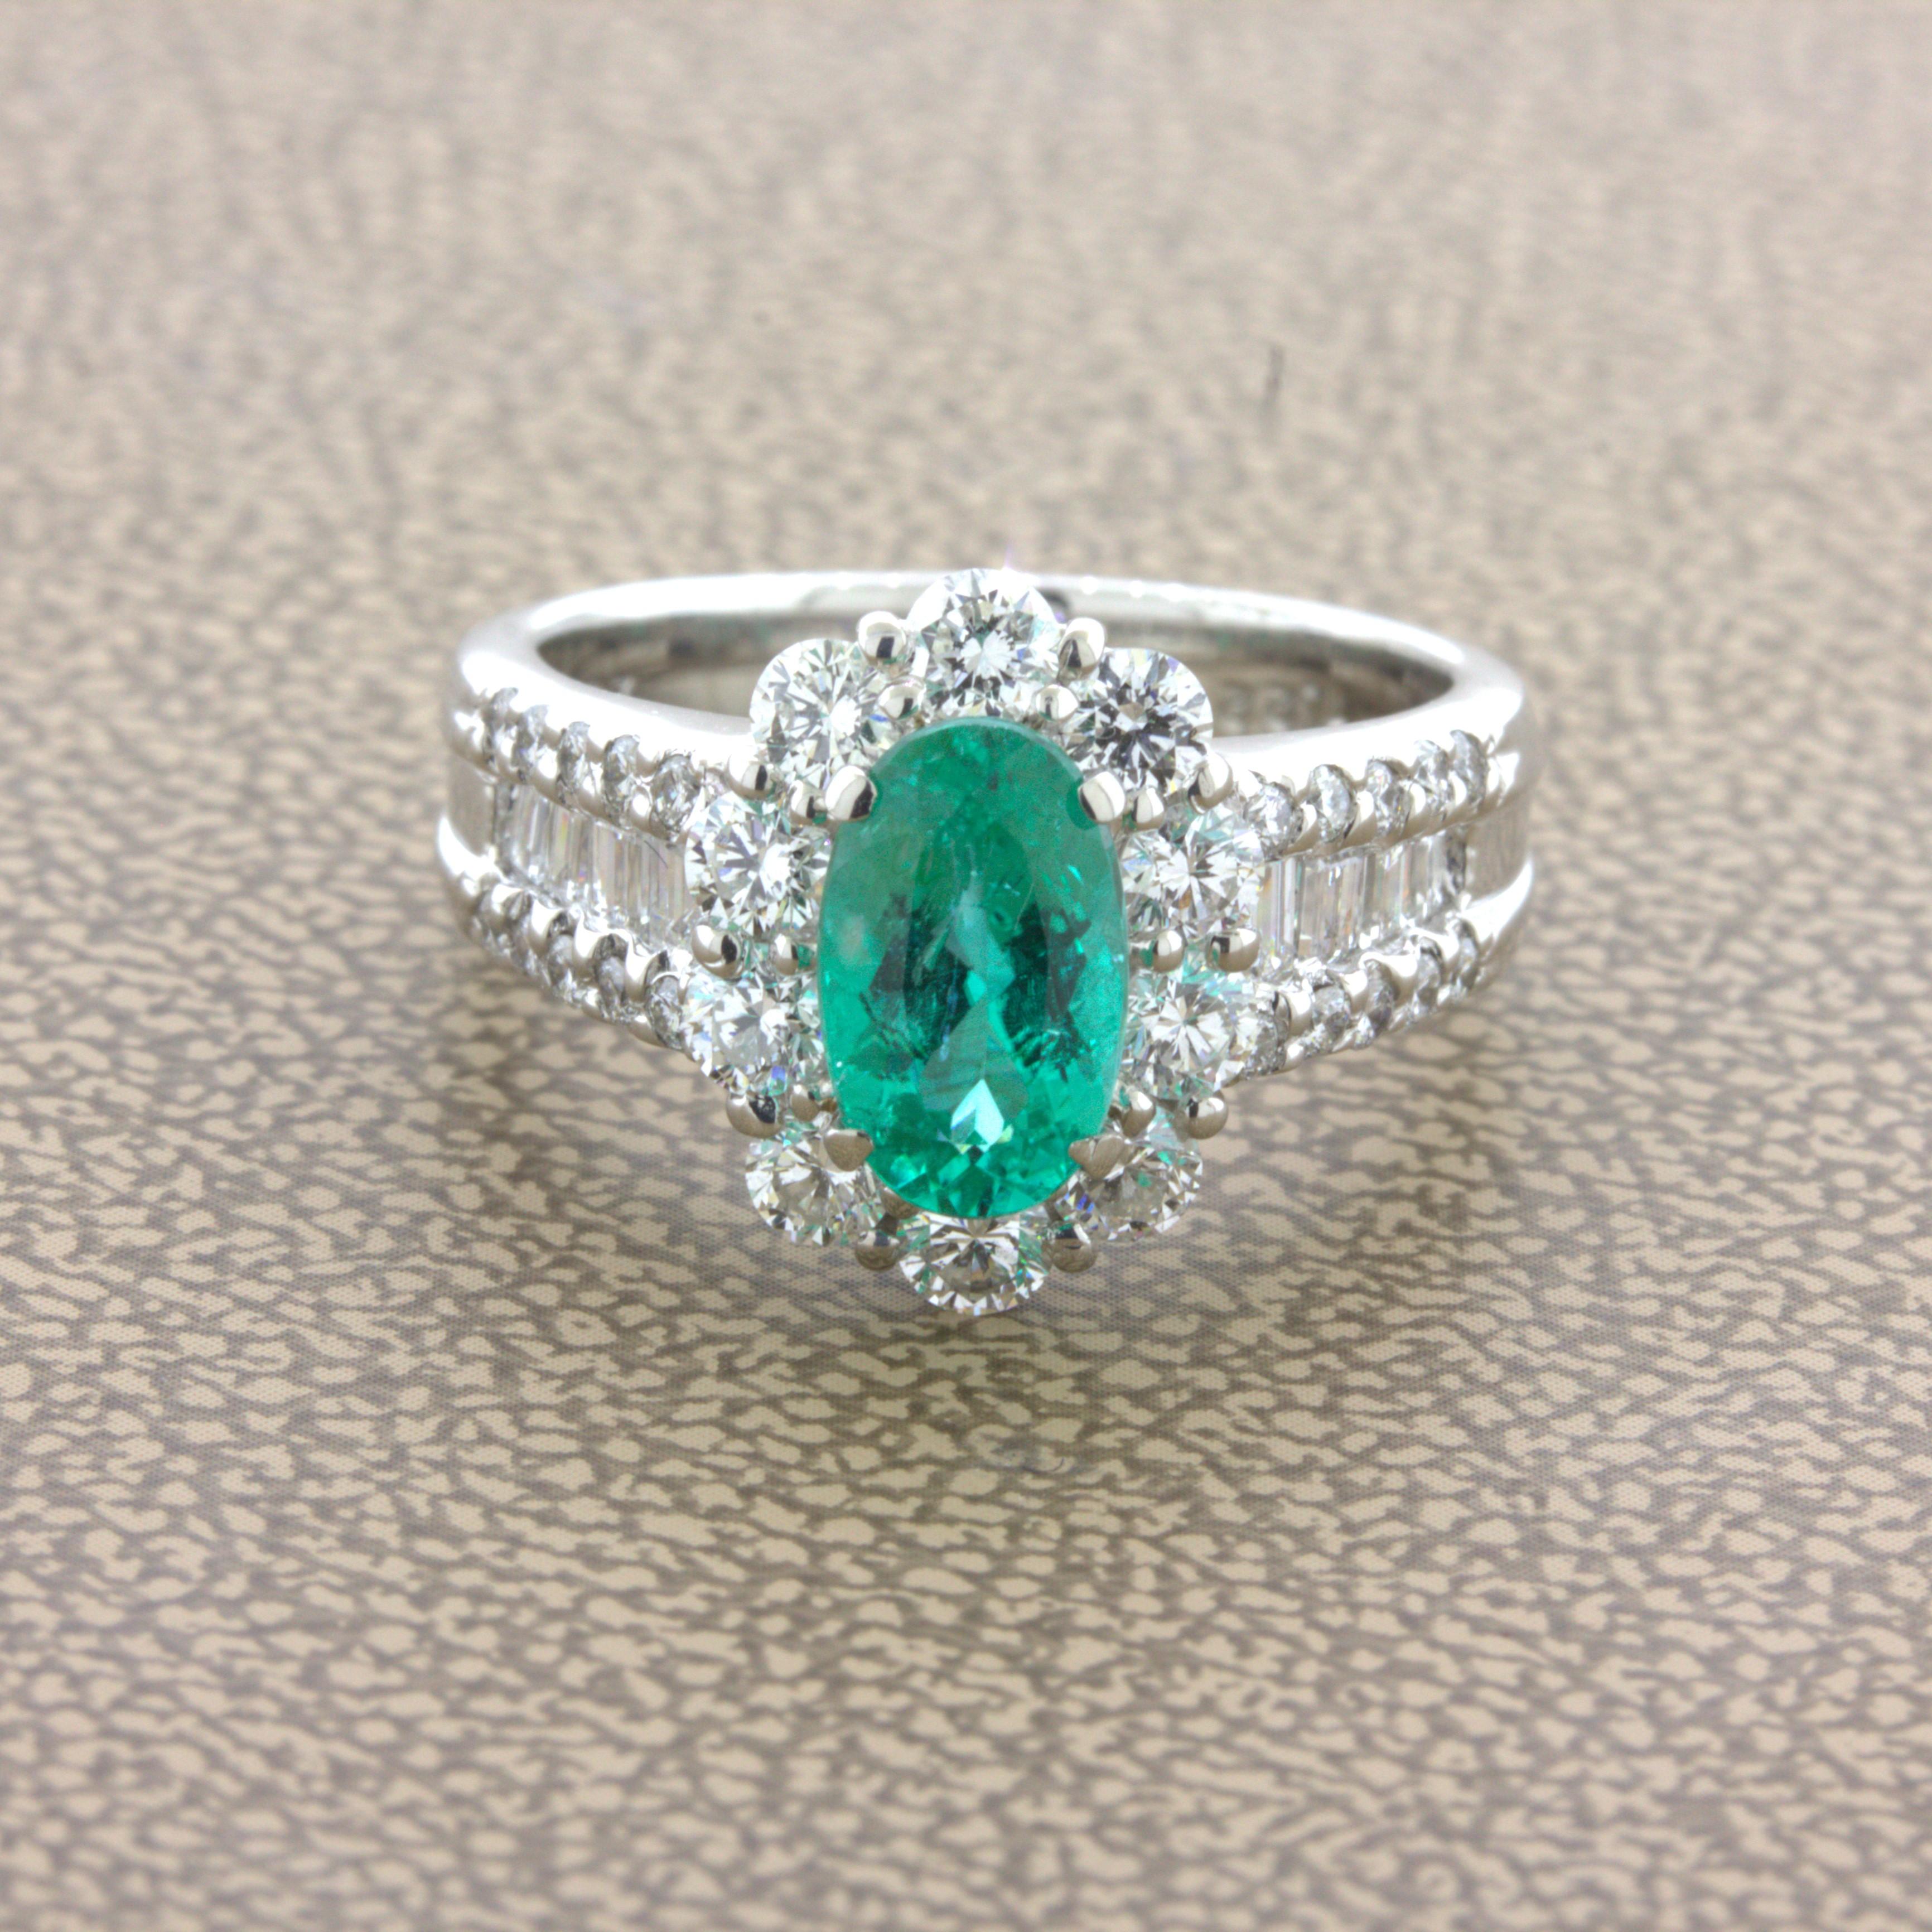 A rare and exotic gem from the state of Paraiba, Brazil. Brazilian Paraibas are extremely hard to find in sizes 0.50 carat and above. This stone weighs 1.22 carats and also has a superb rich electric color which they are known for. Stones weighing